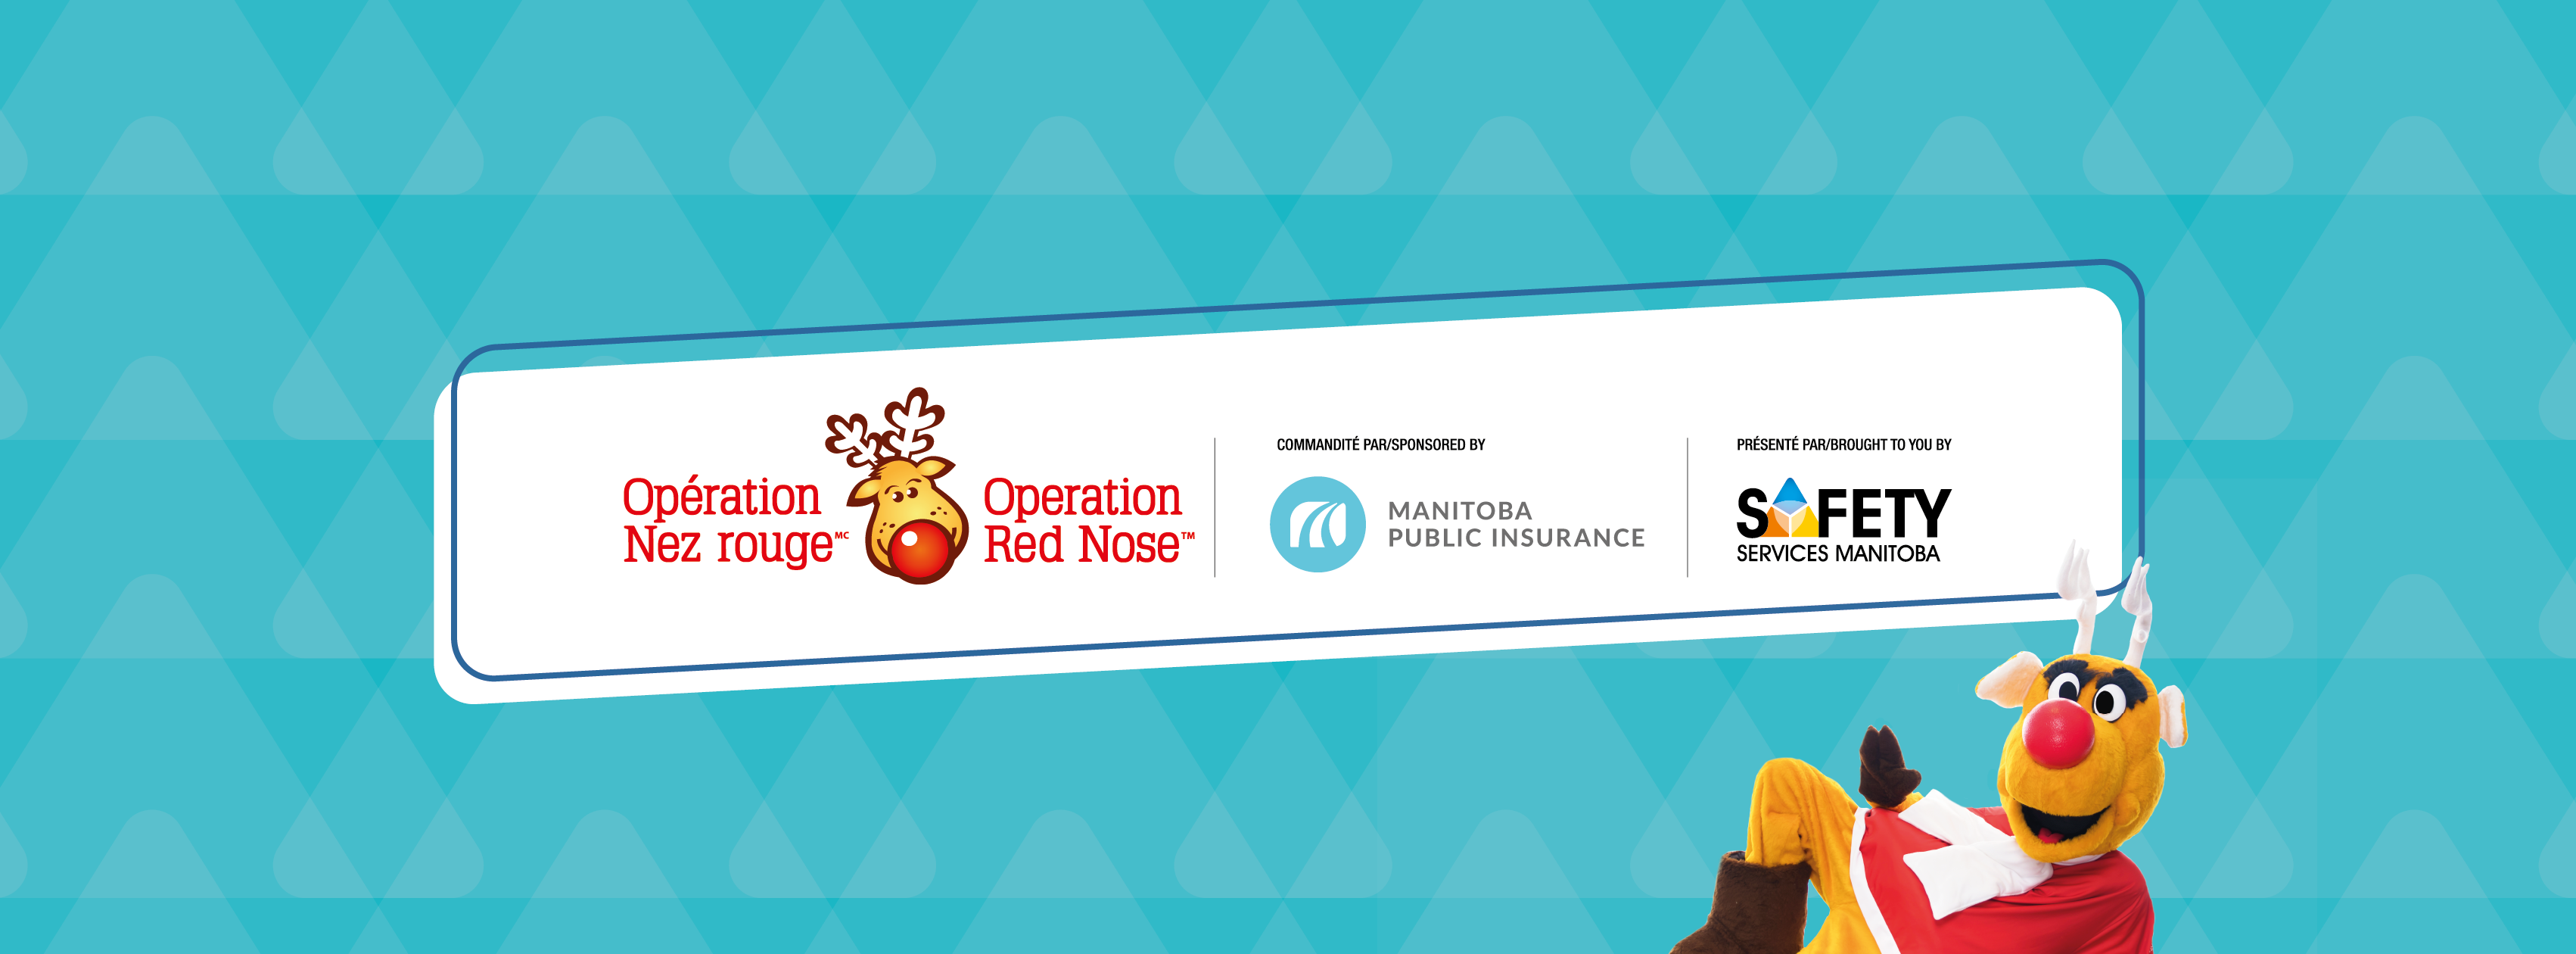 Operation Red Nose Banner